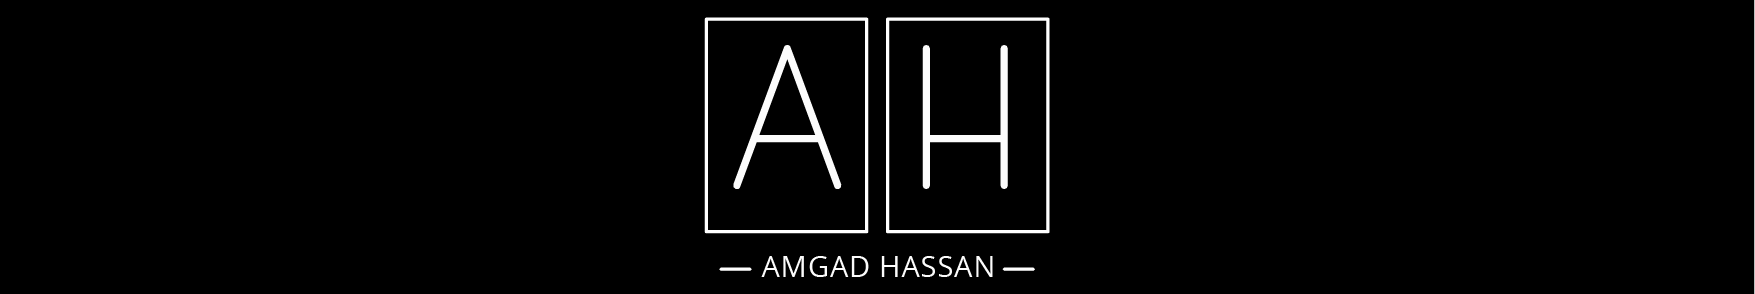 Amgad Hassan's profile banner